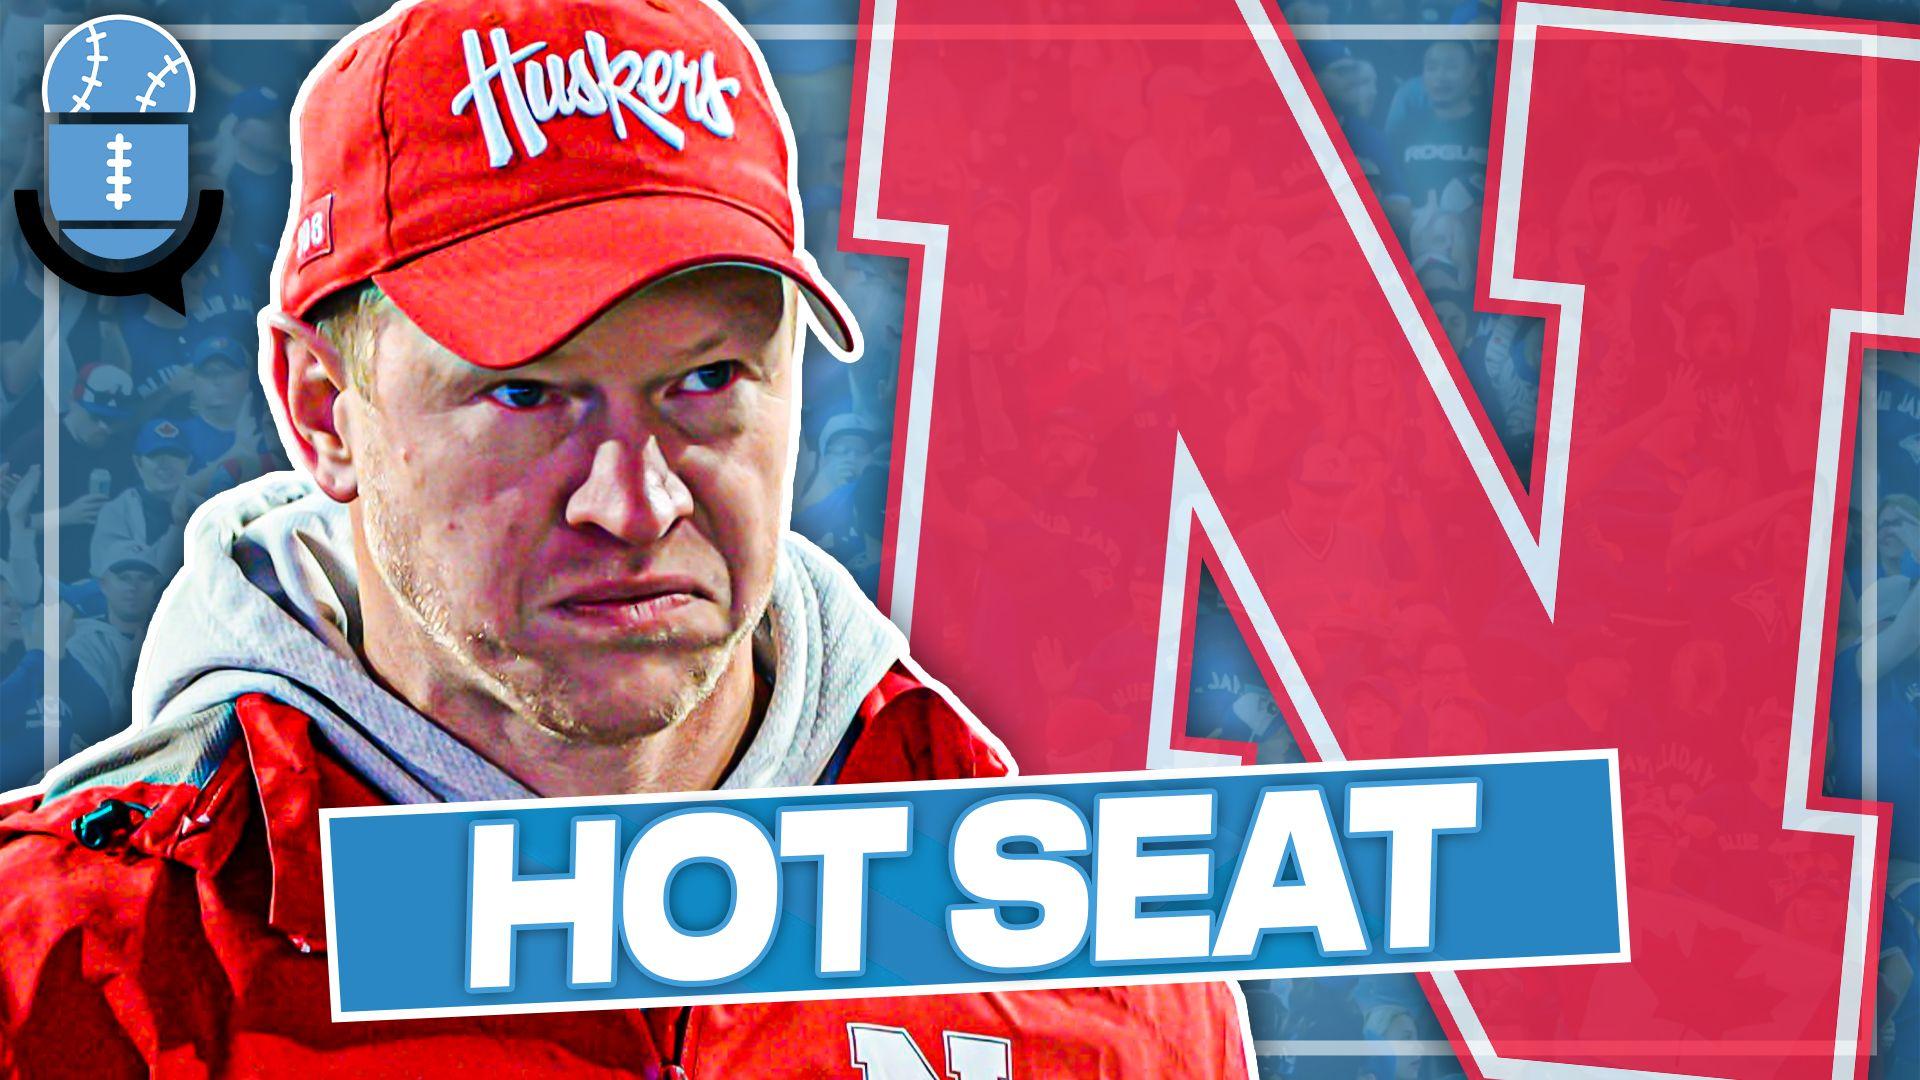 Is Scott Frost on the HOT SEAT